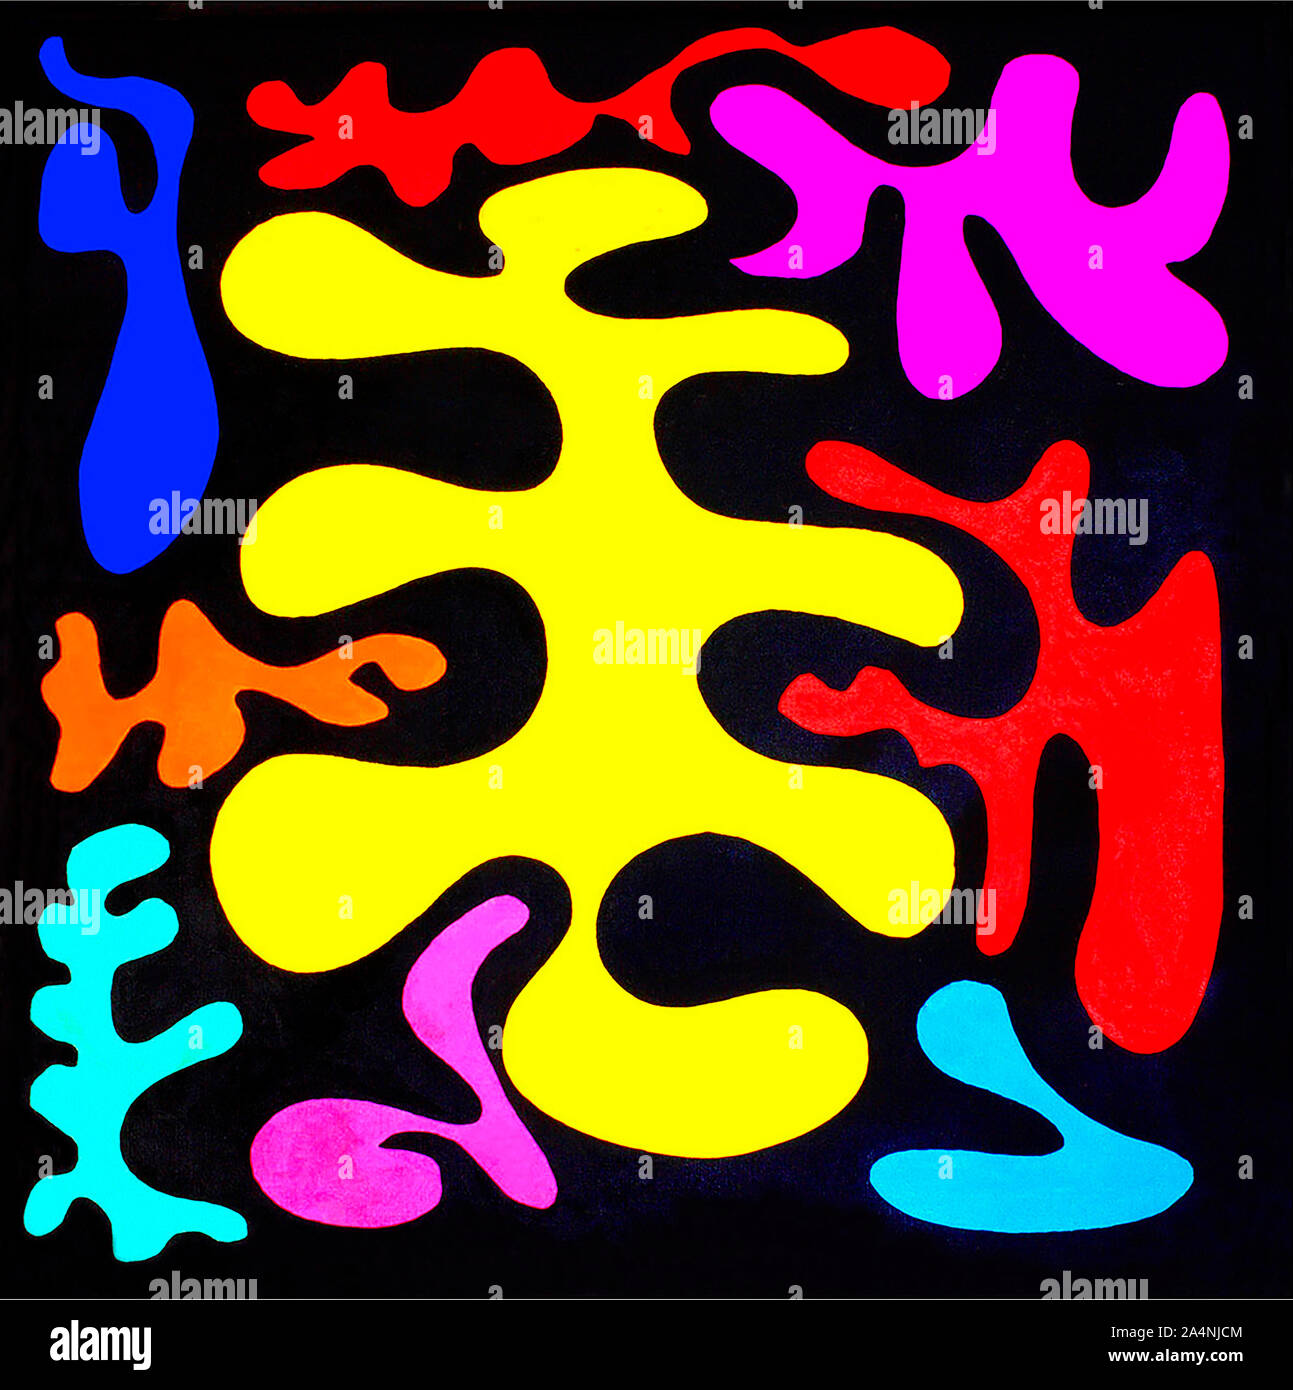 Dancing Colors - Multi Colored Graphic Abstract image containing Matisse-like shapes on a black background designed by Burton Zaro Stock Photo